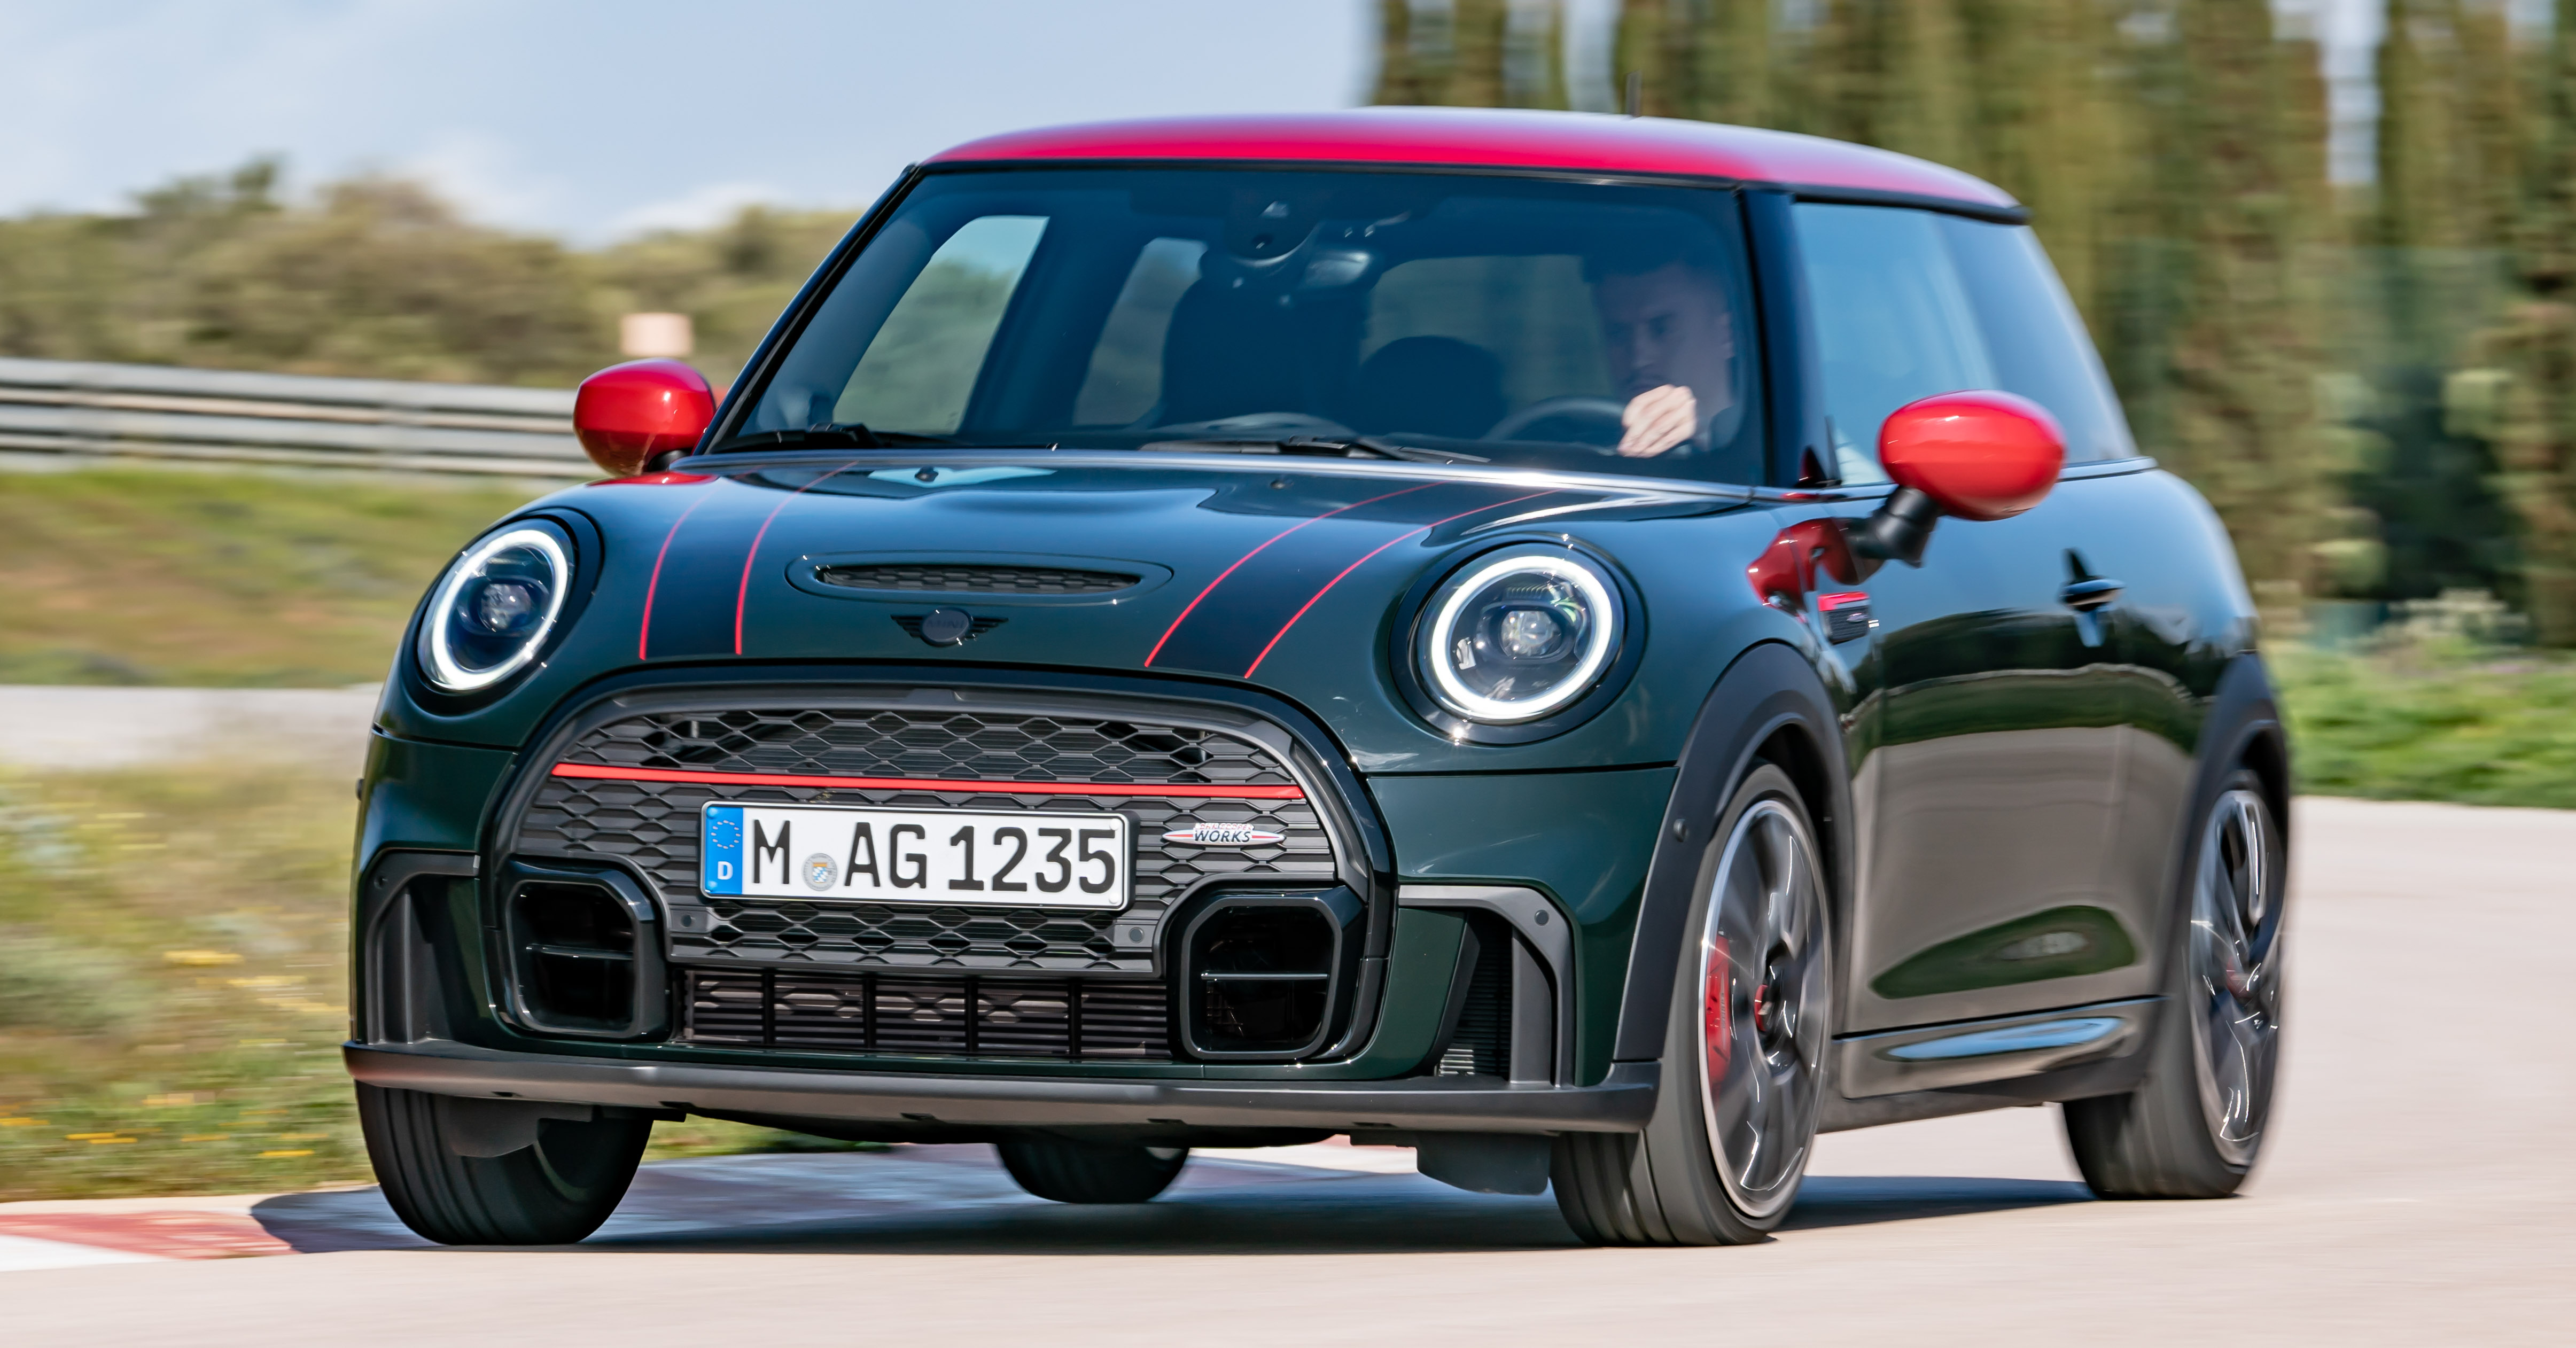 2021 Mini John Cooper Works 3 Door Facelift Launched In Malaysia – Second  F56 Lci With 231 Ps, Rm303K - Paultan.Org